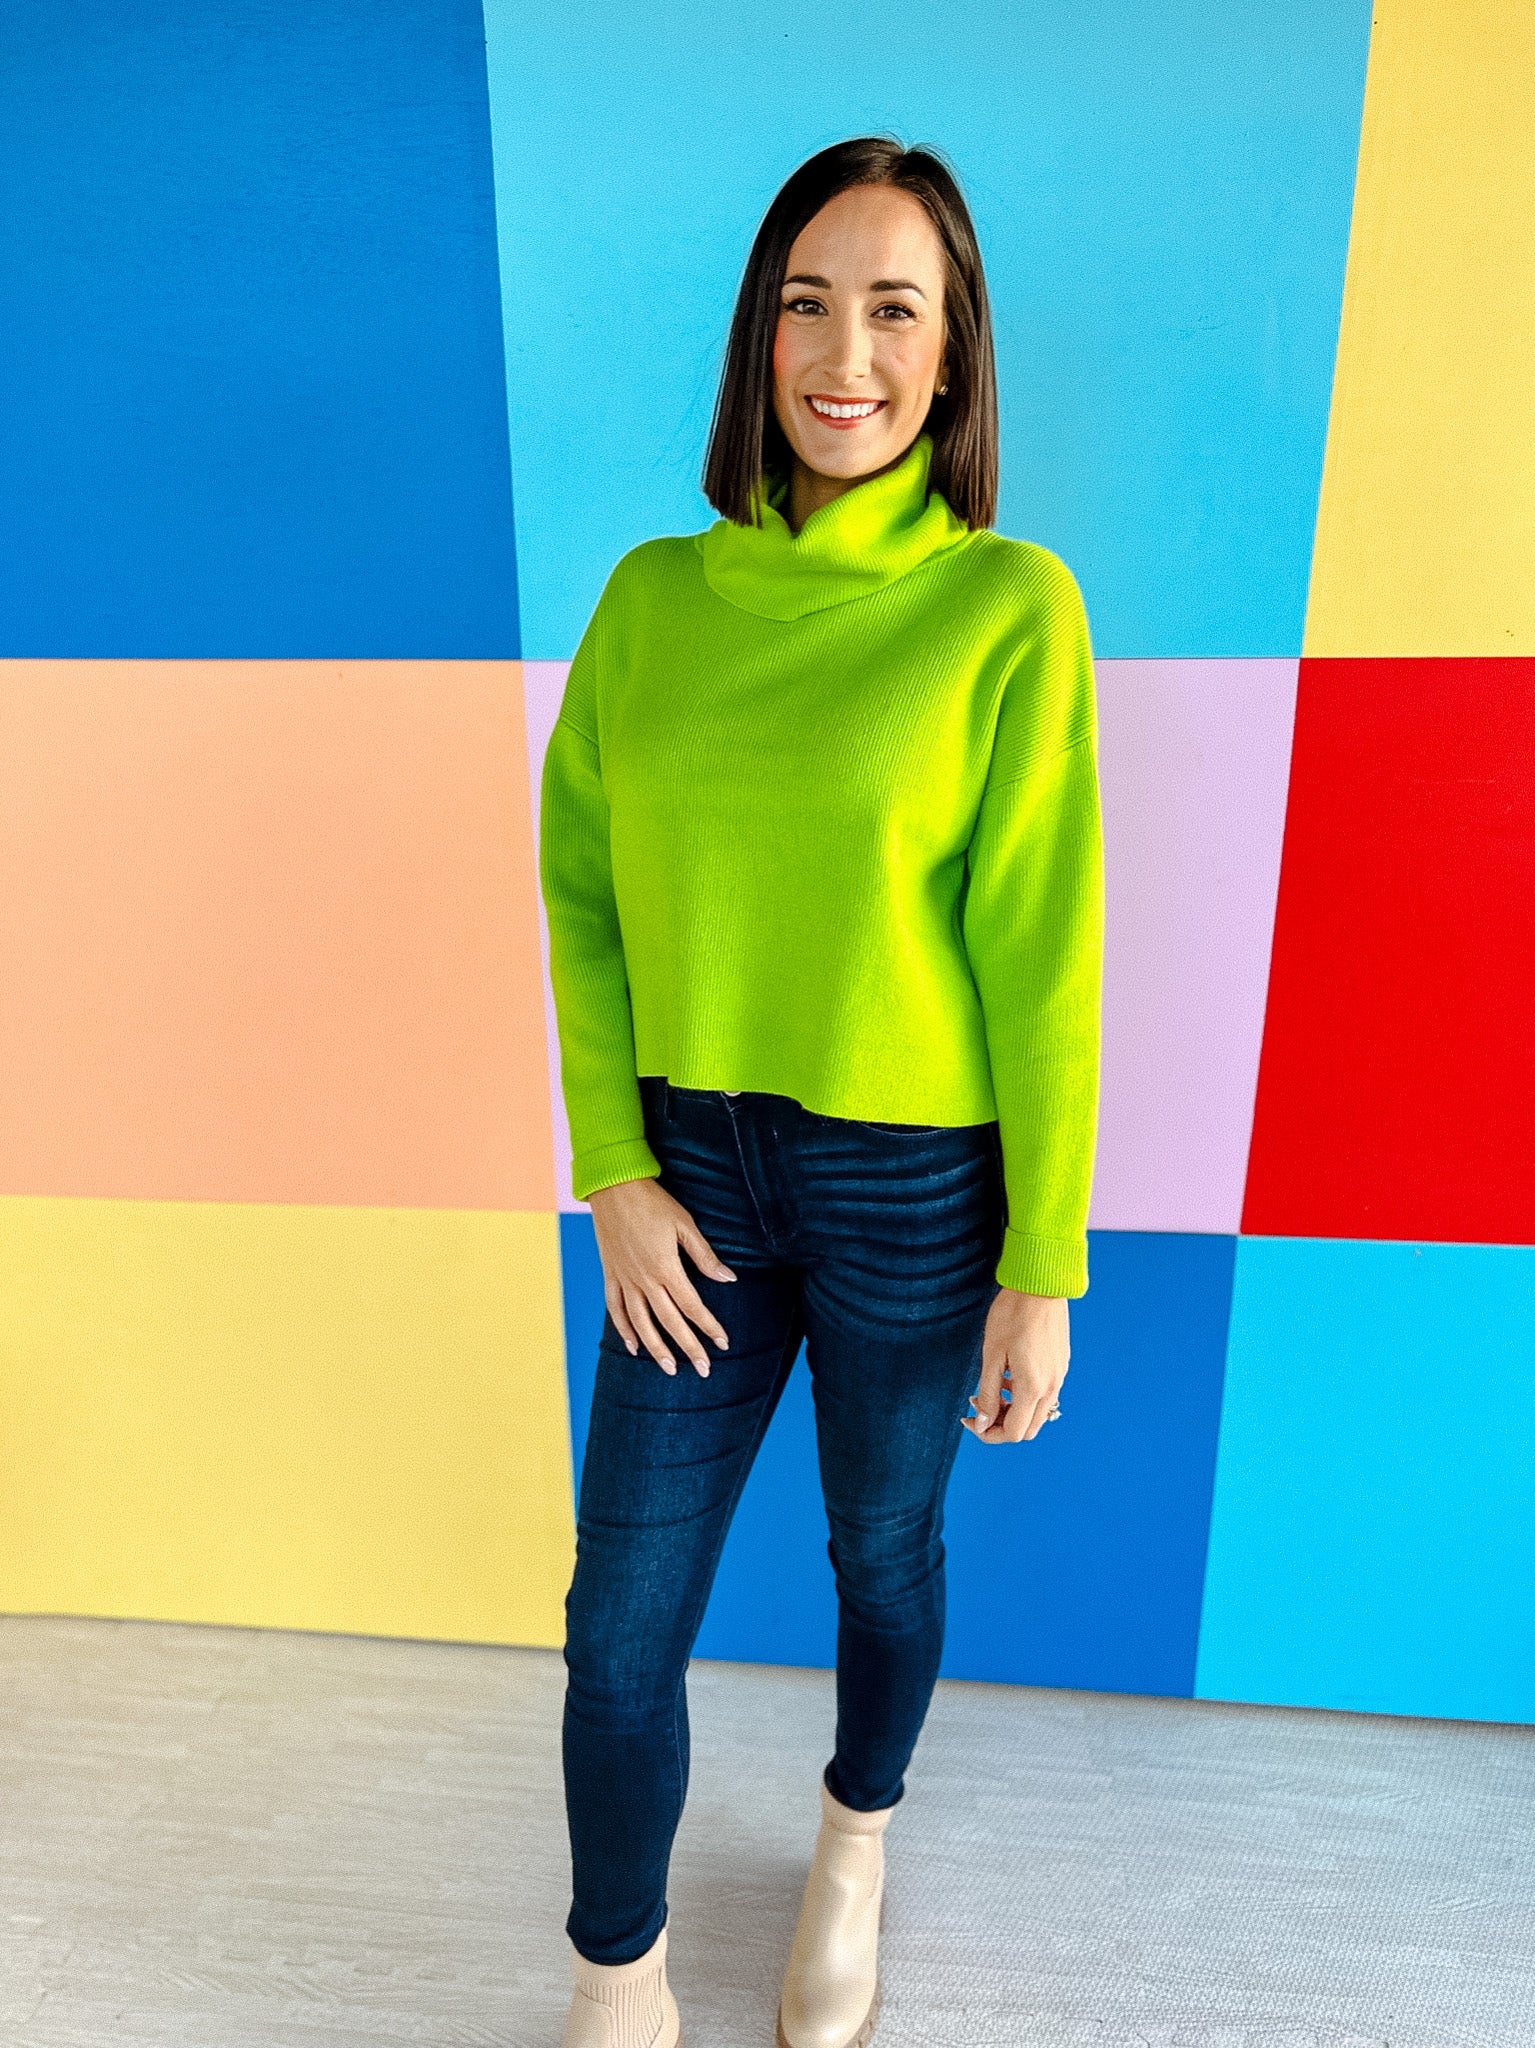 Latte Lover Turtleneck Knit Sweater - Bright Lime Green